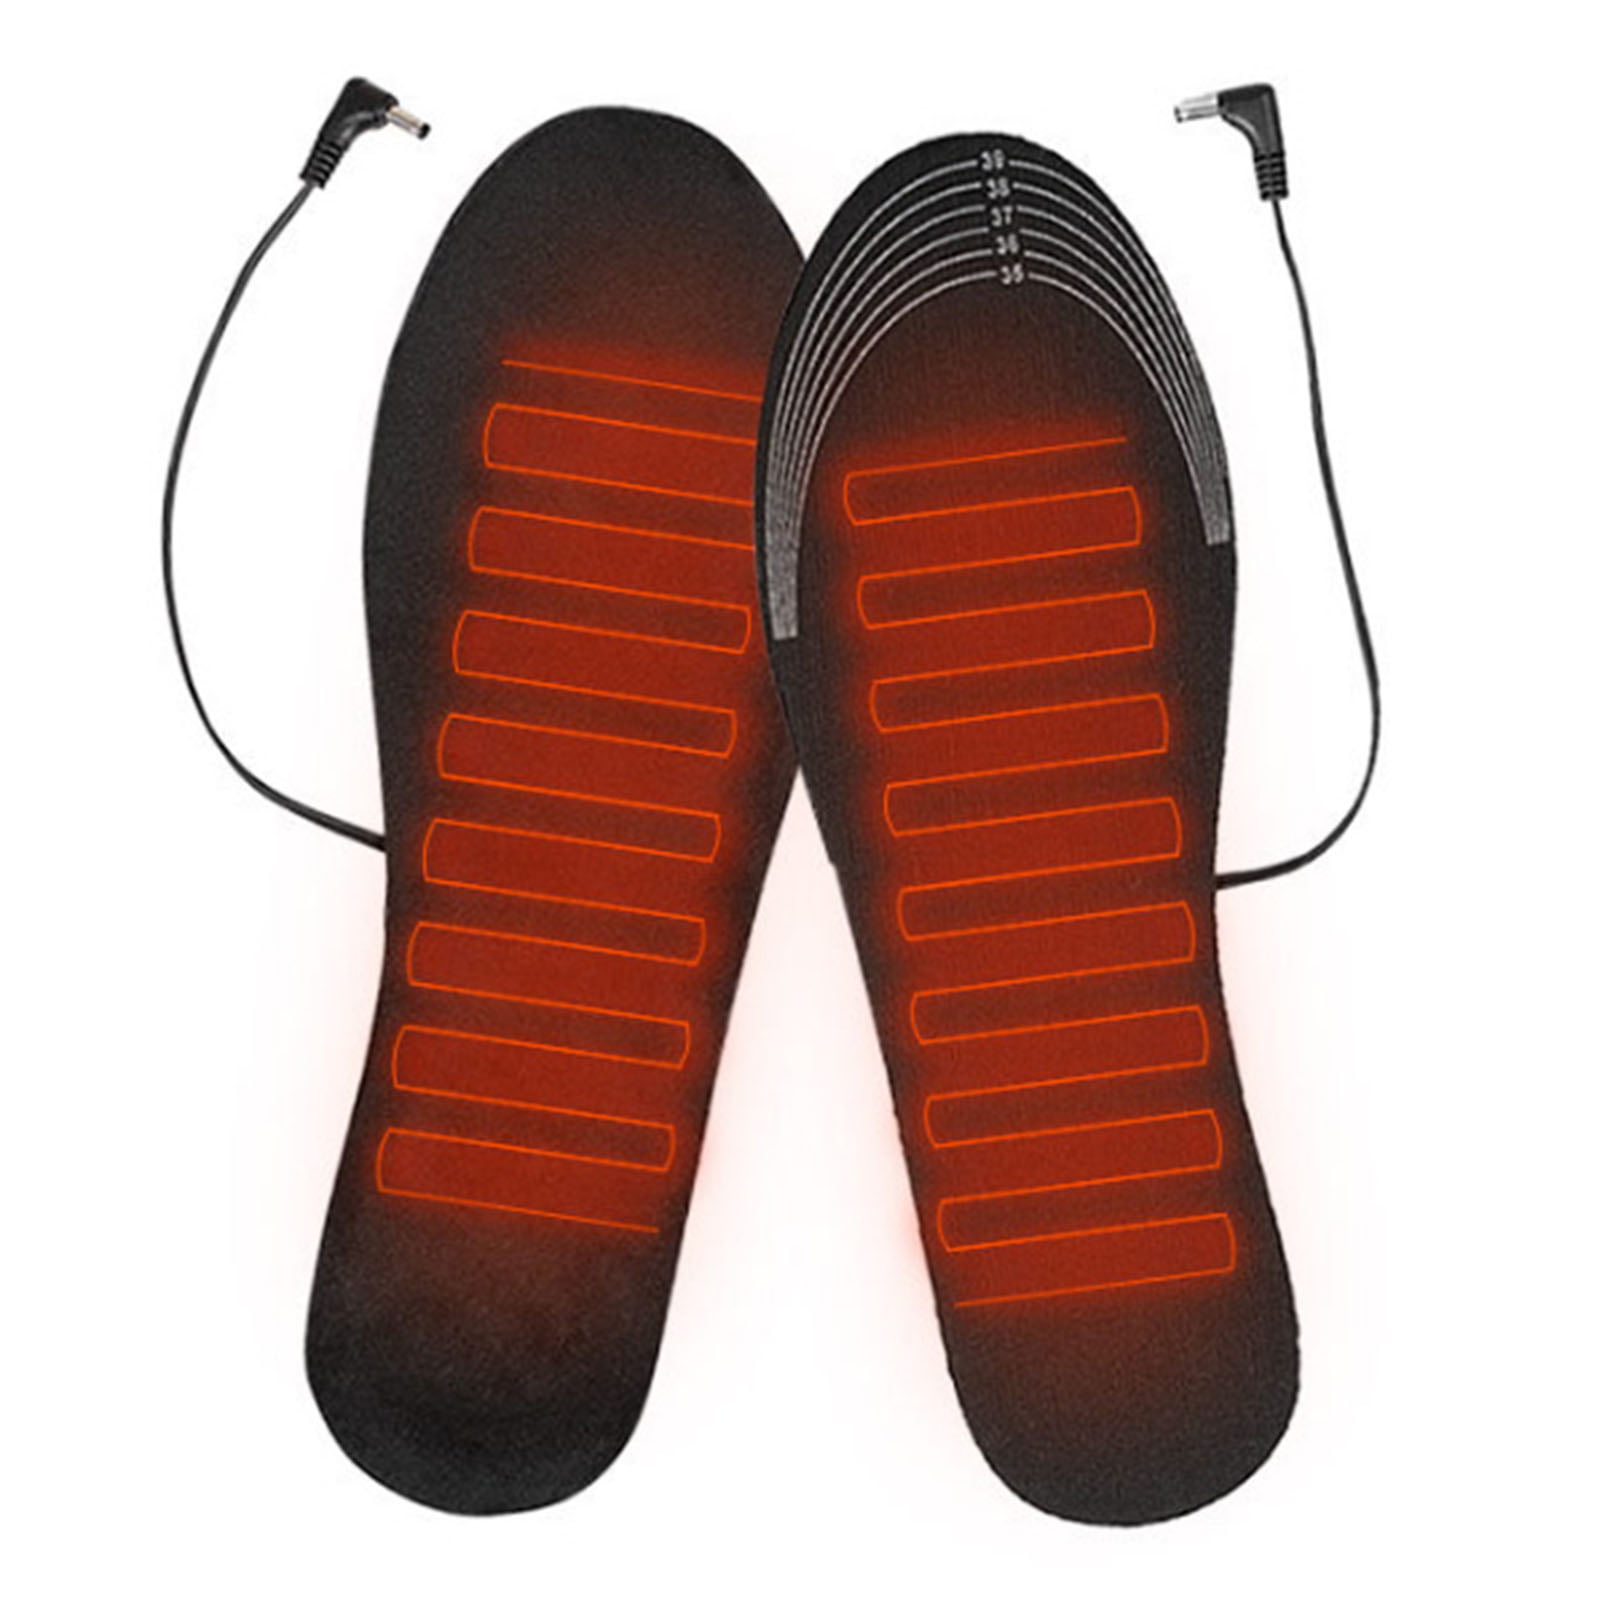 1 Pair USB Heated Insoles Foot Warmer Mat Winter Outdoor Shoe Insole L 